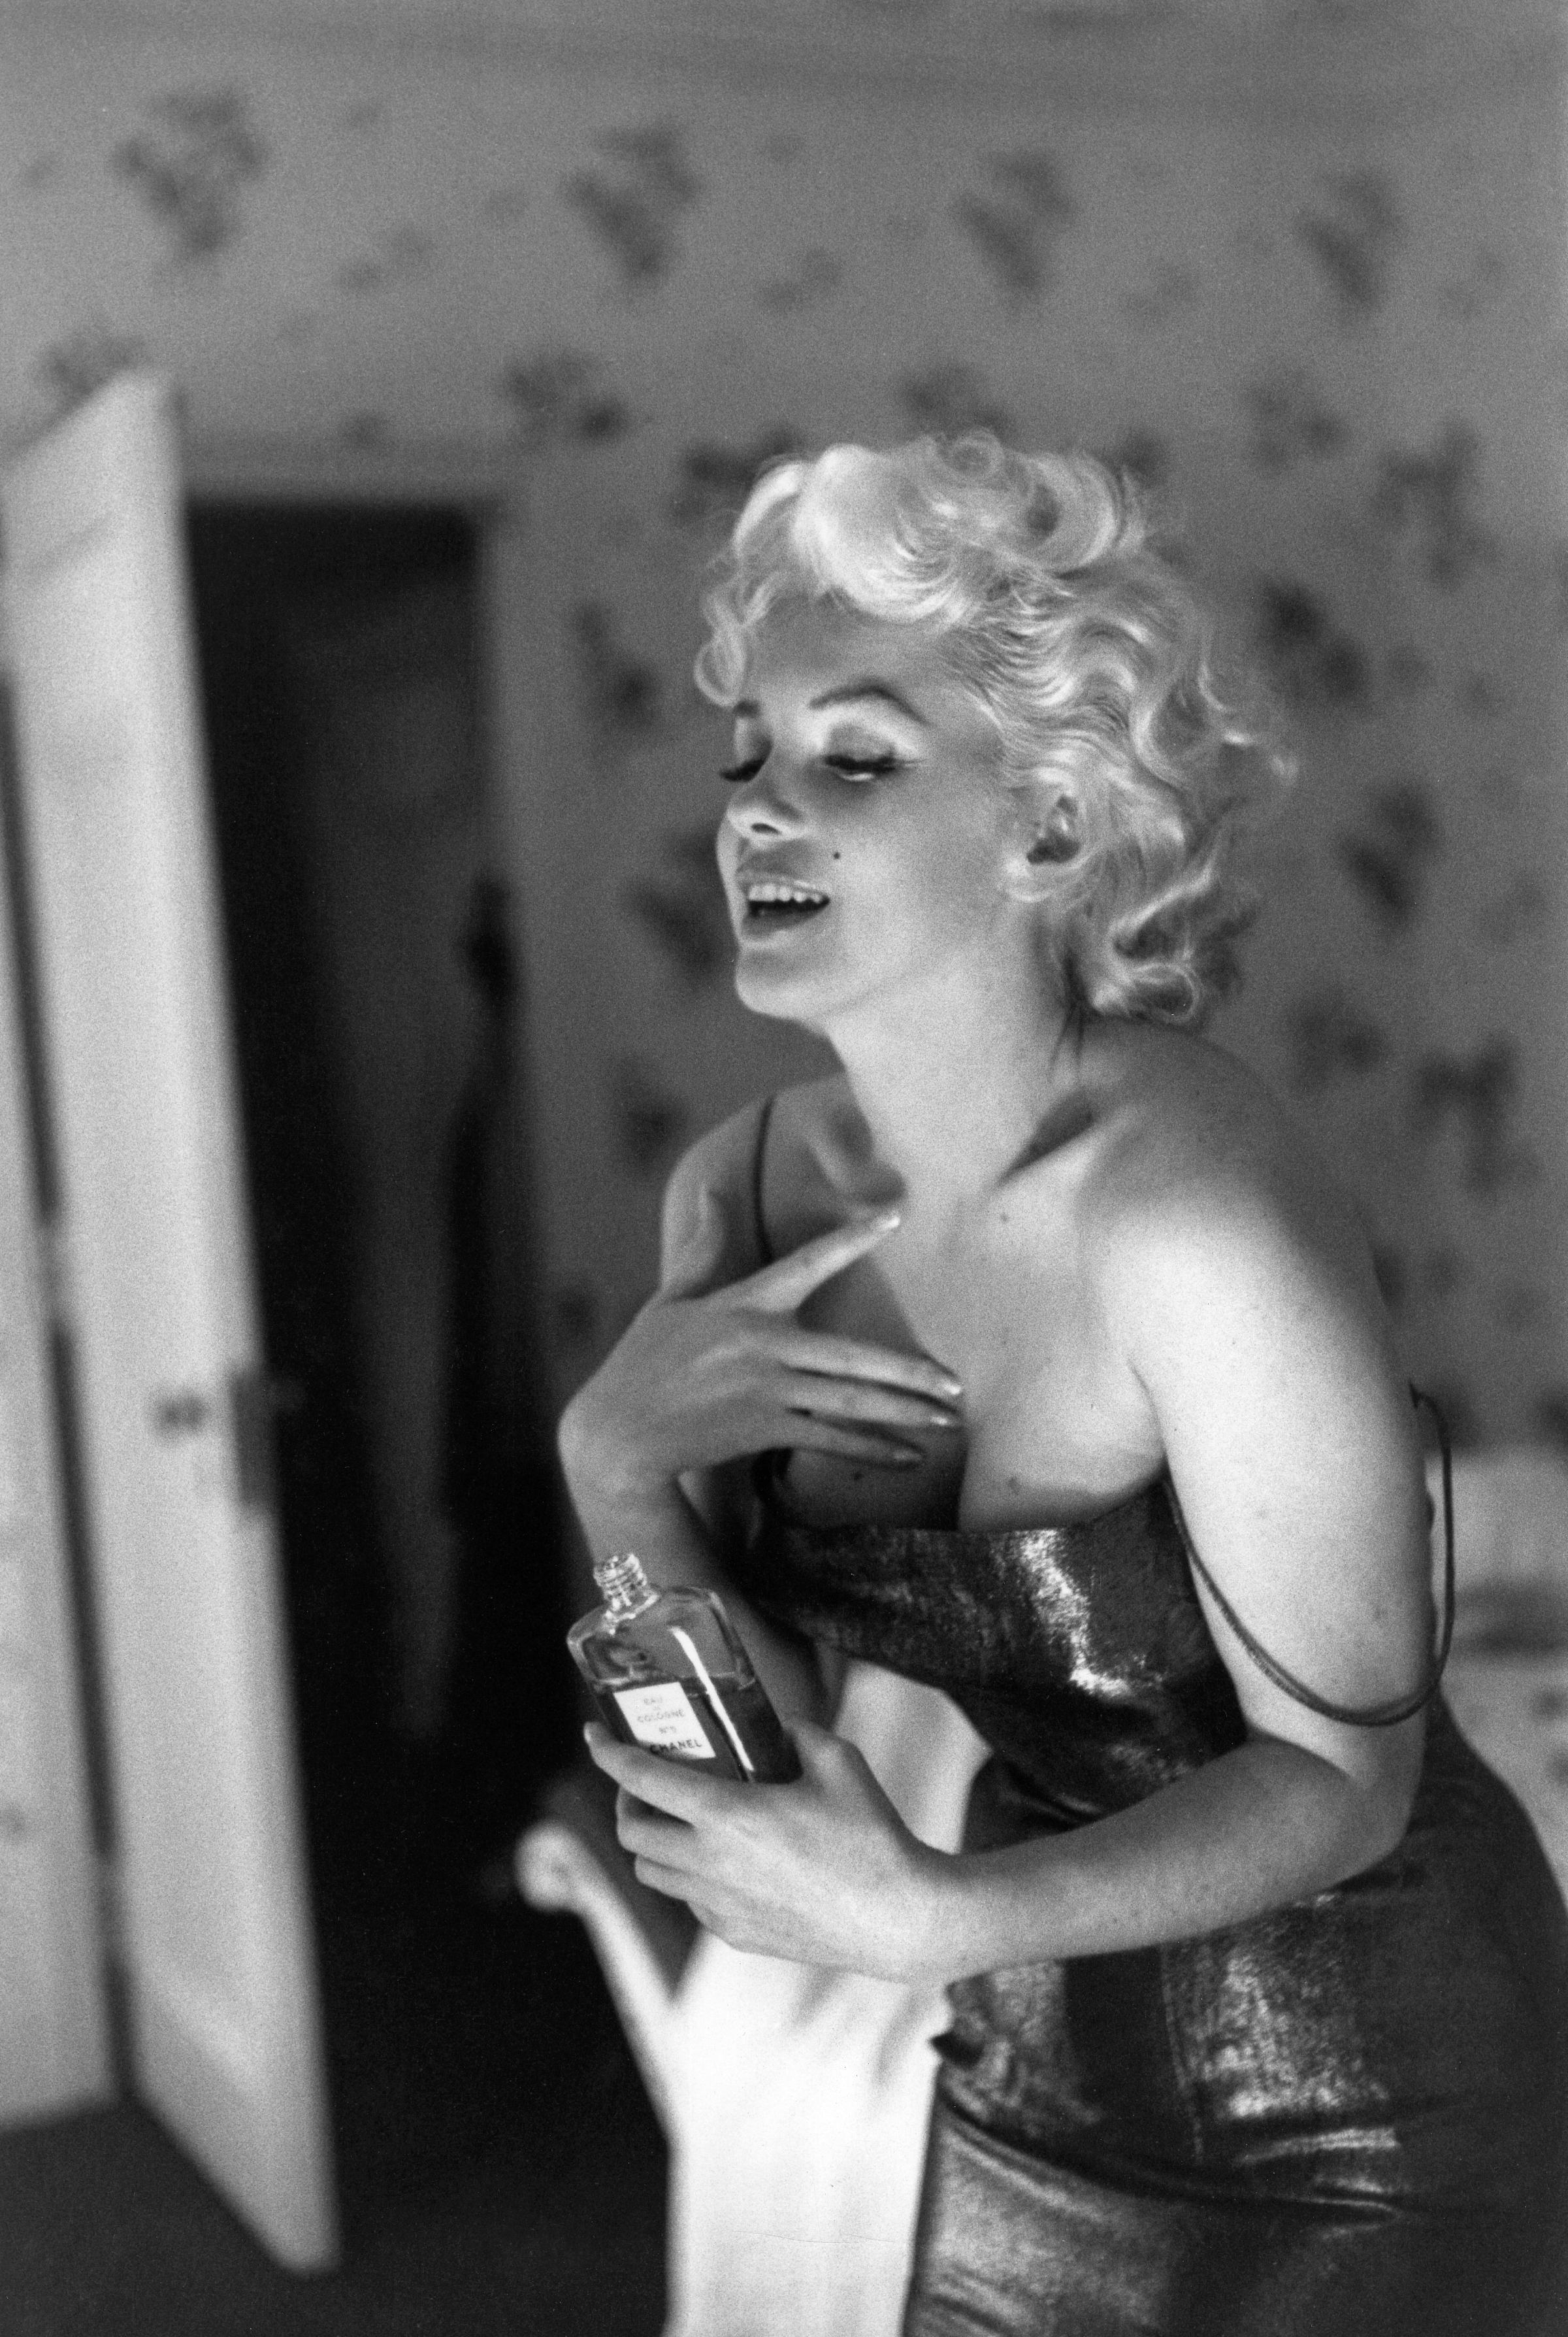 Monroe dabs on some of Coco Chanel's famous perfume while getting ready to go see Cat on a Hot Tin Roof. In a famous quote, when asked what she wore to bed, the screen siren answered, "Chanel No. 5, of course."